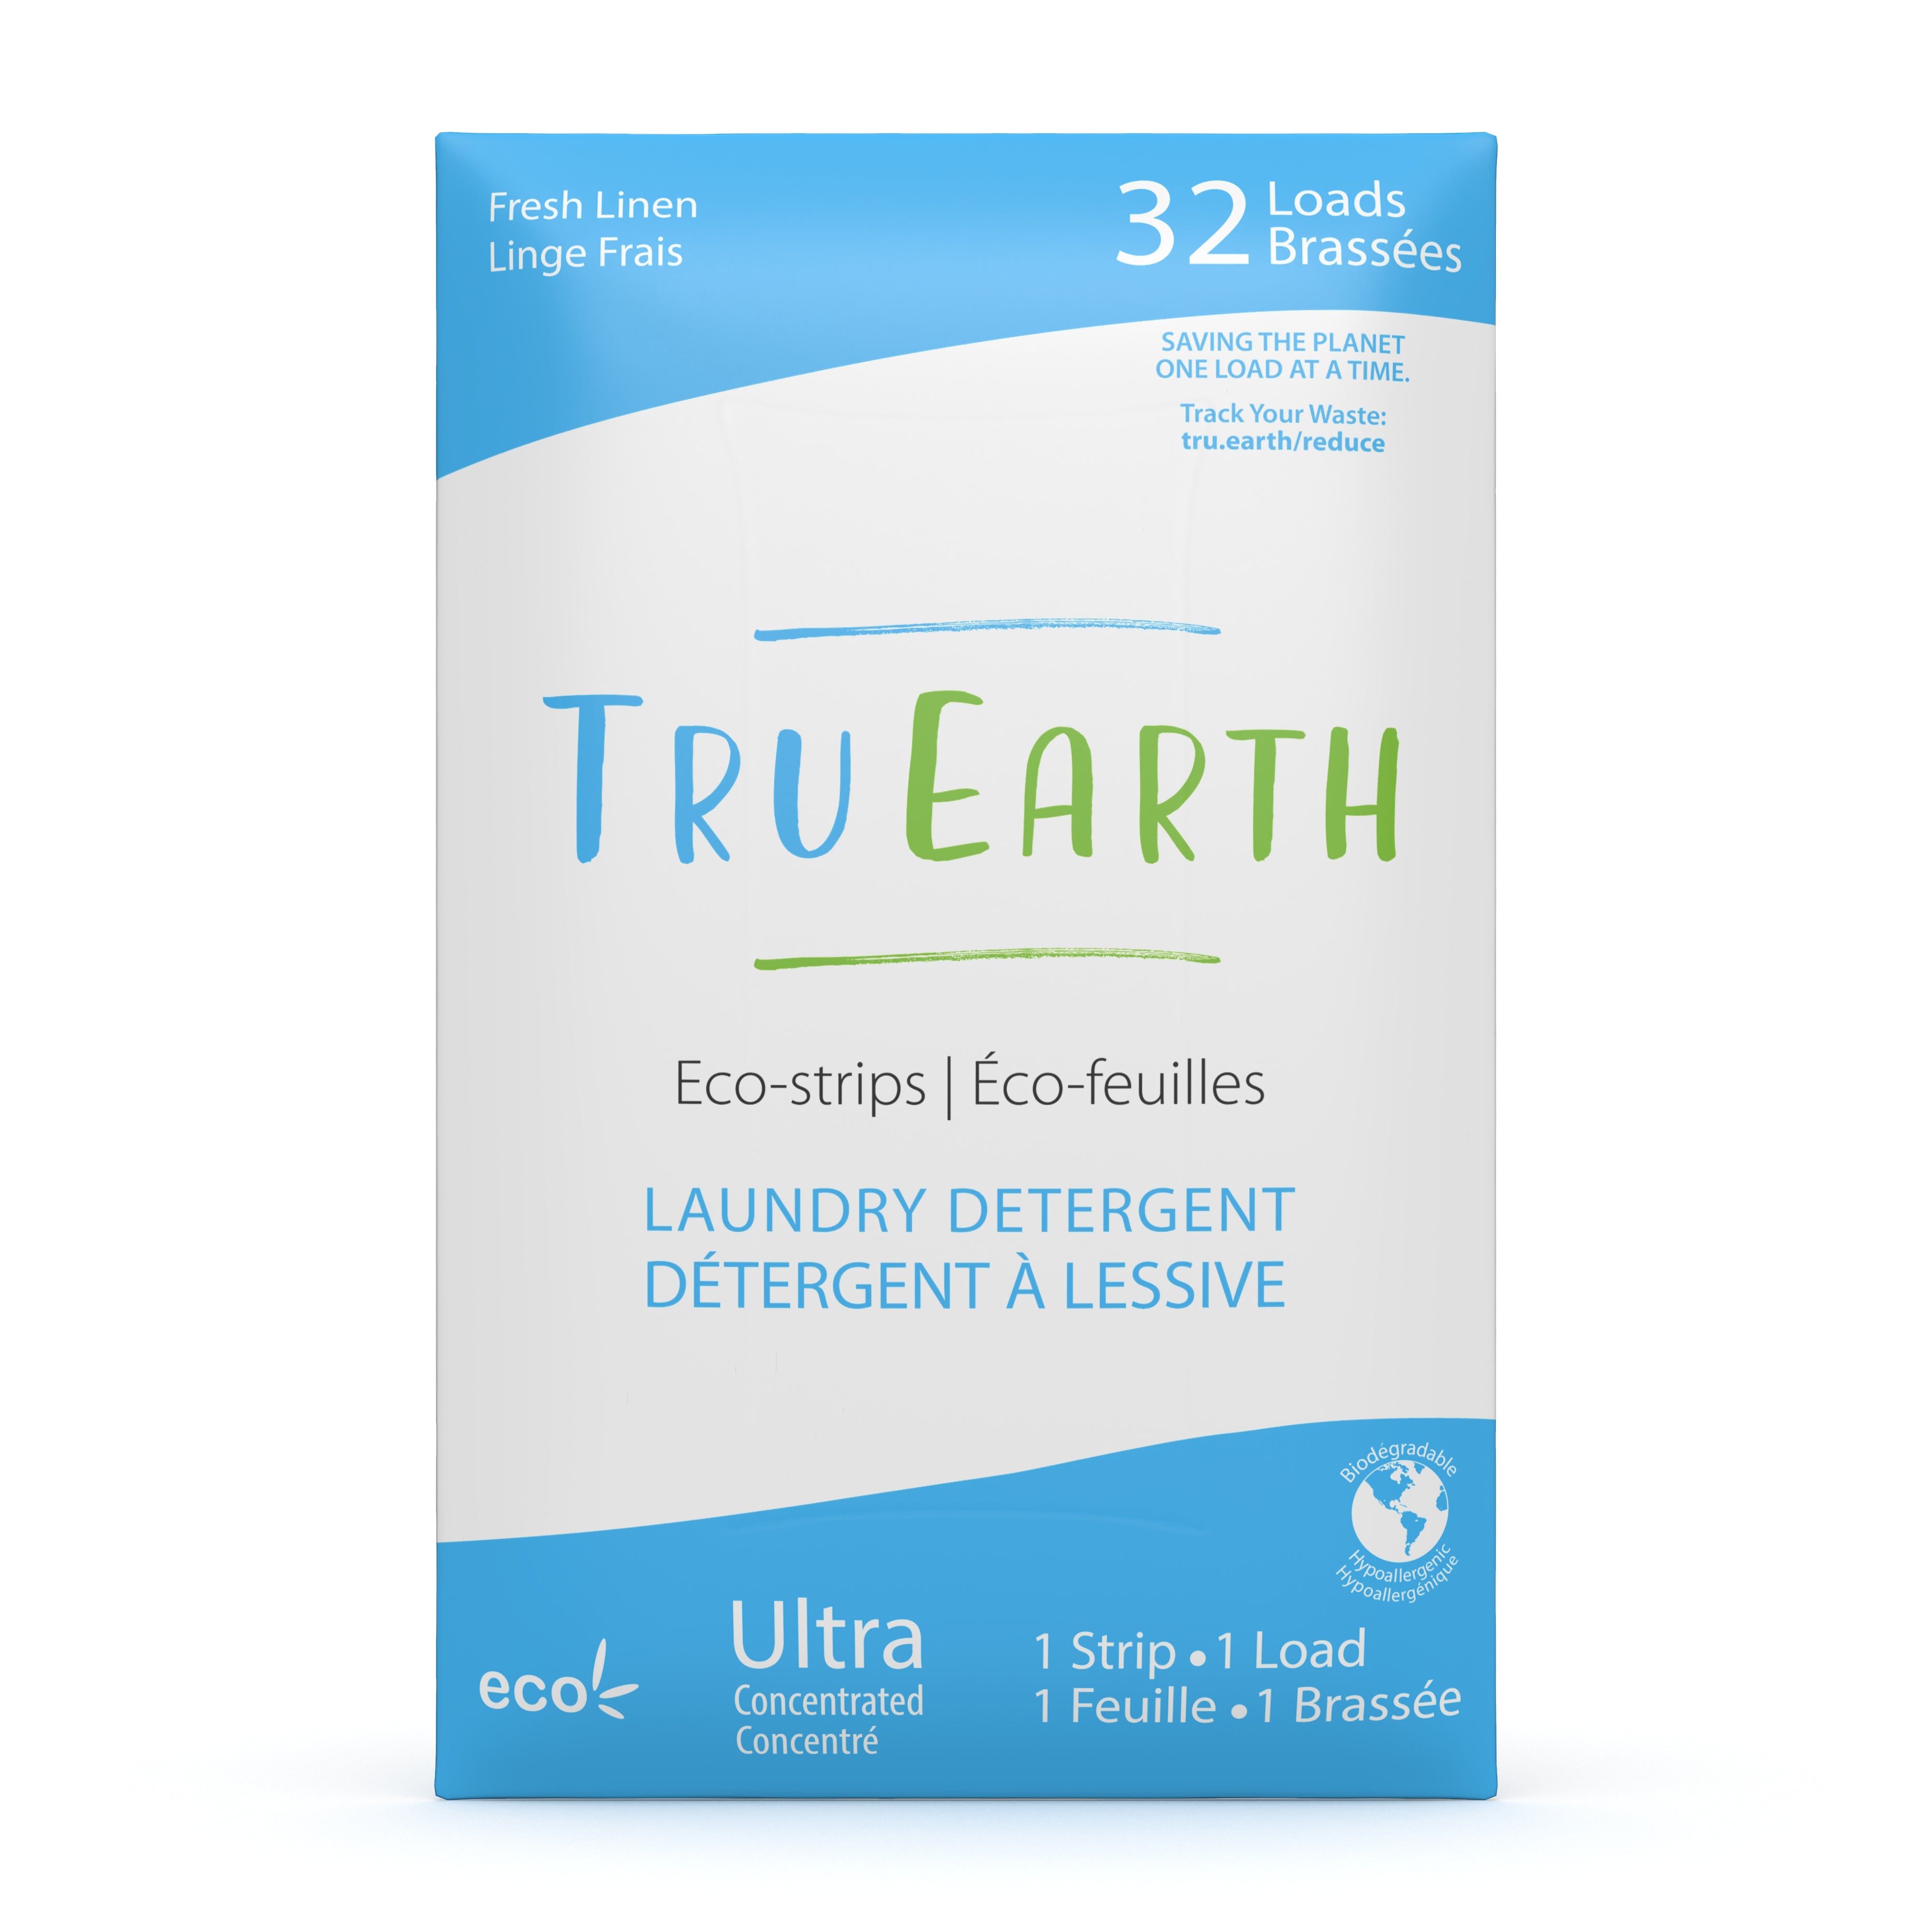 Tru Earth Eco-strips Laundry Detergent for Sustainable Zero-Waste Laundry; Fresh Linen Laundry Soap 32 Loads 